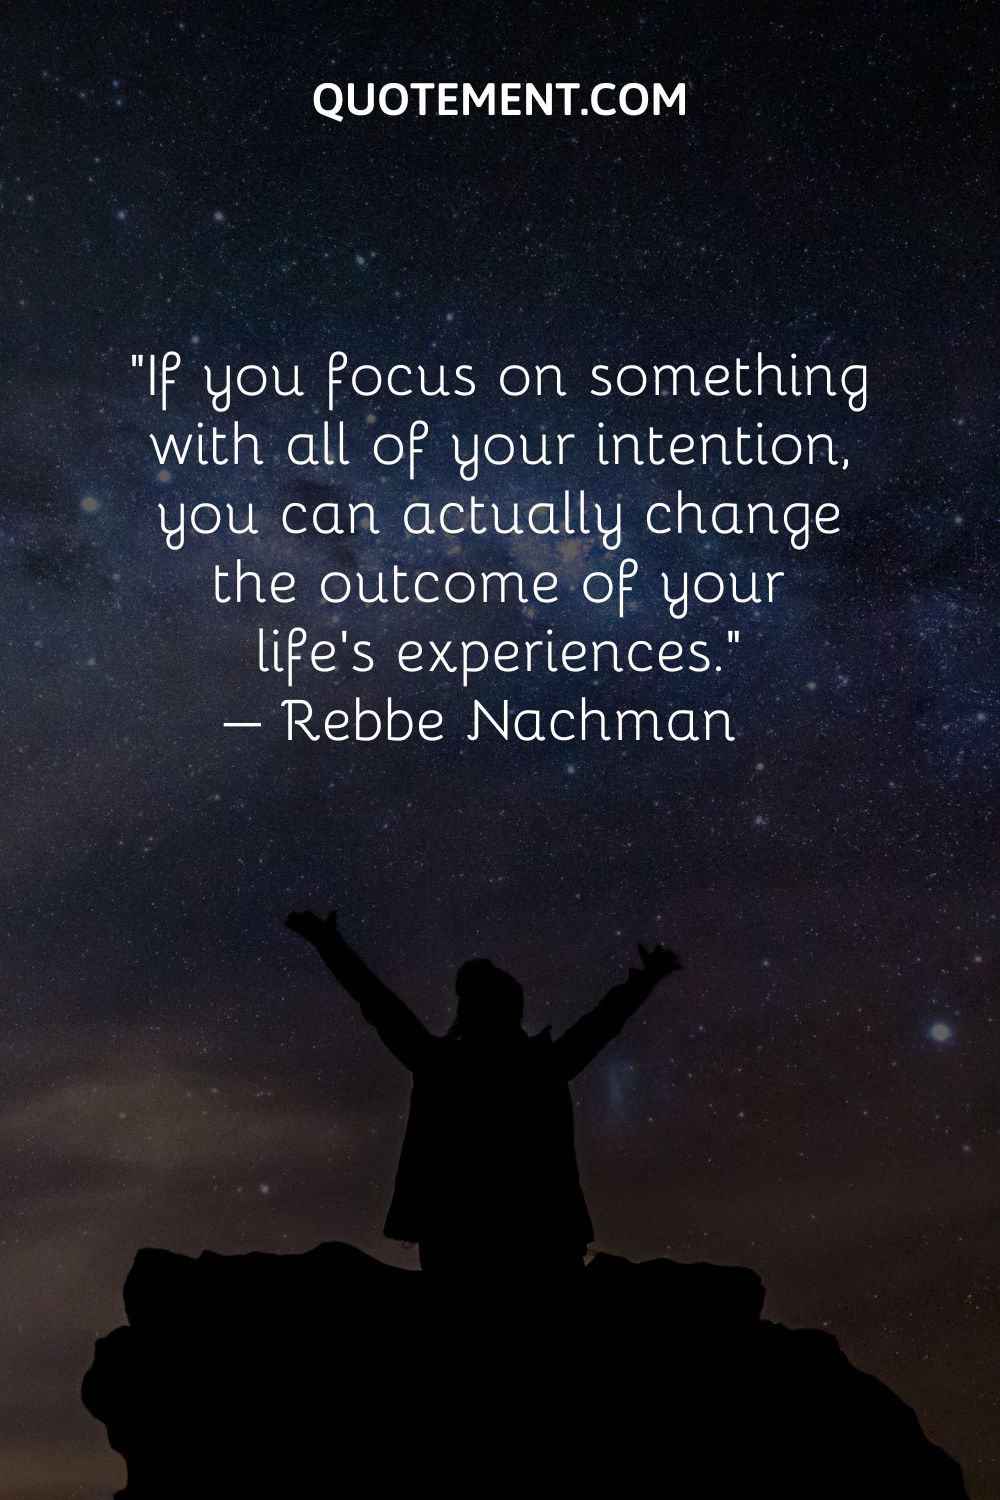 If you focus on something with all of your intention, you can actually change the outcome of your life’s experiences